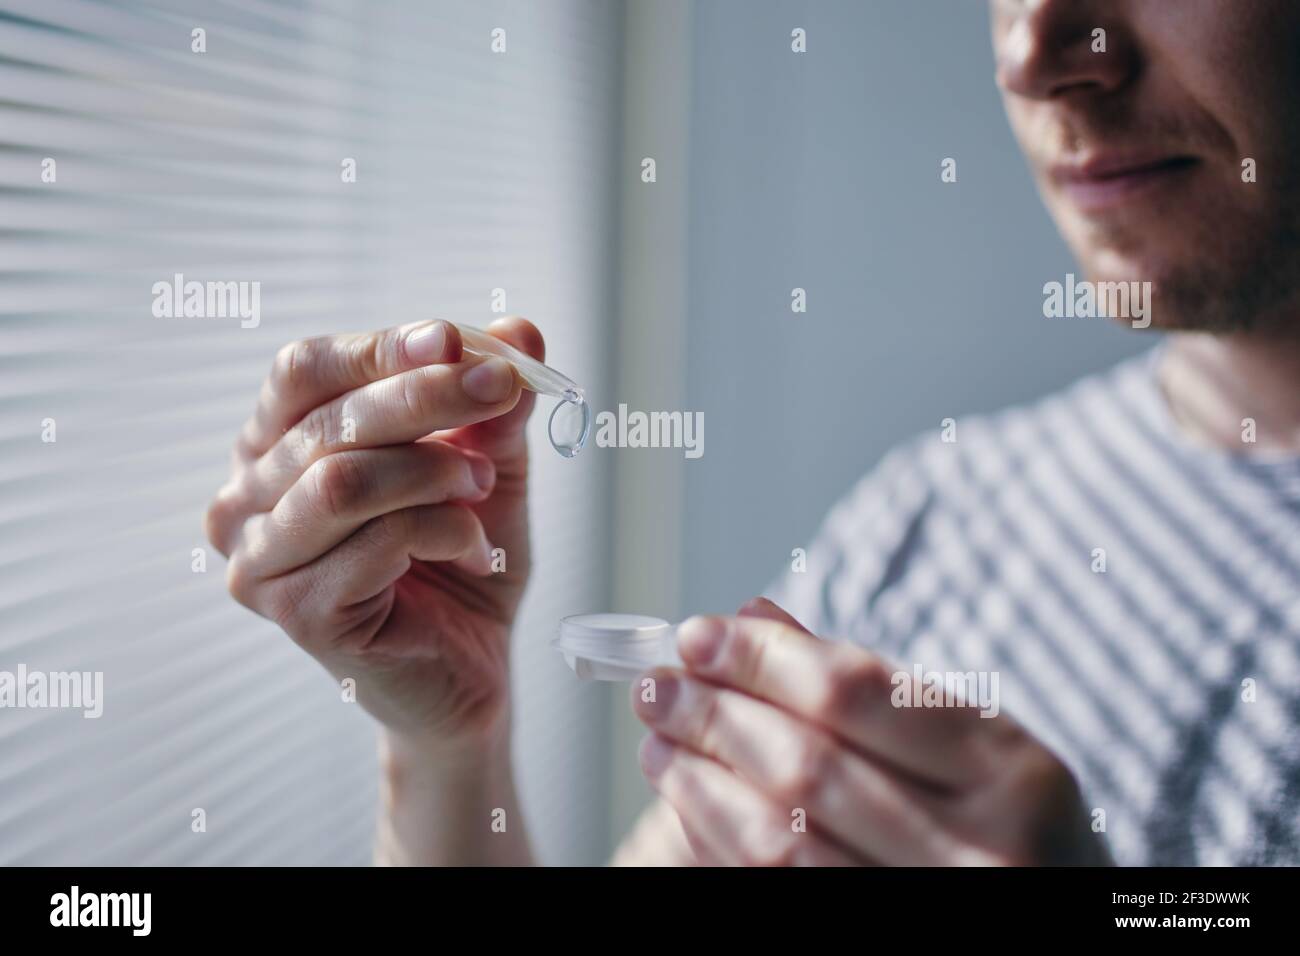 Young man opening contact lens case. Themes eyesight and daily routine. Stock Photo